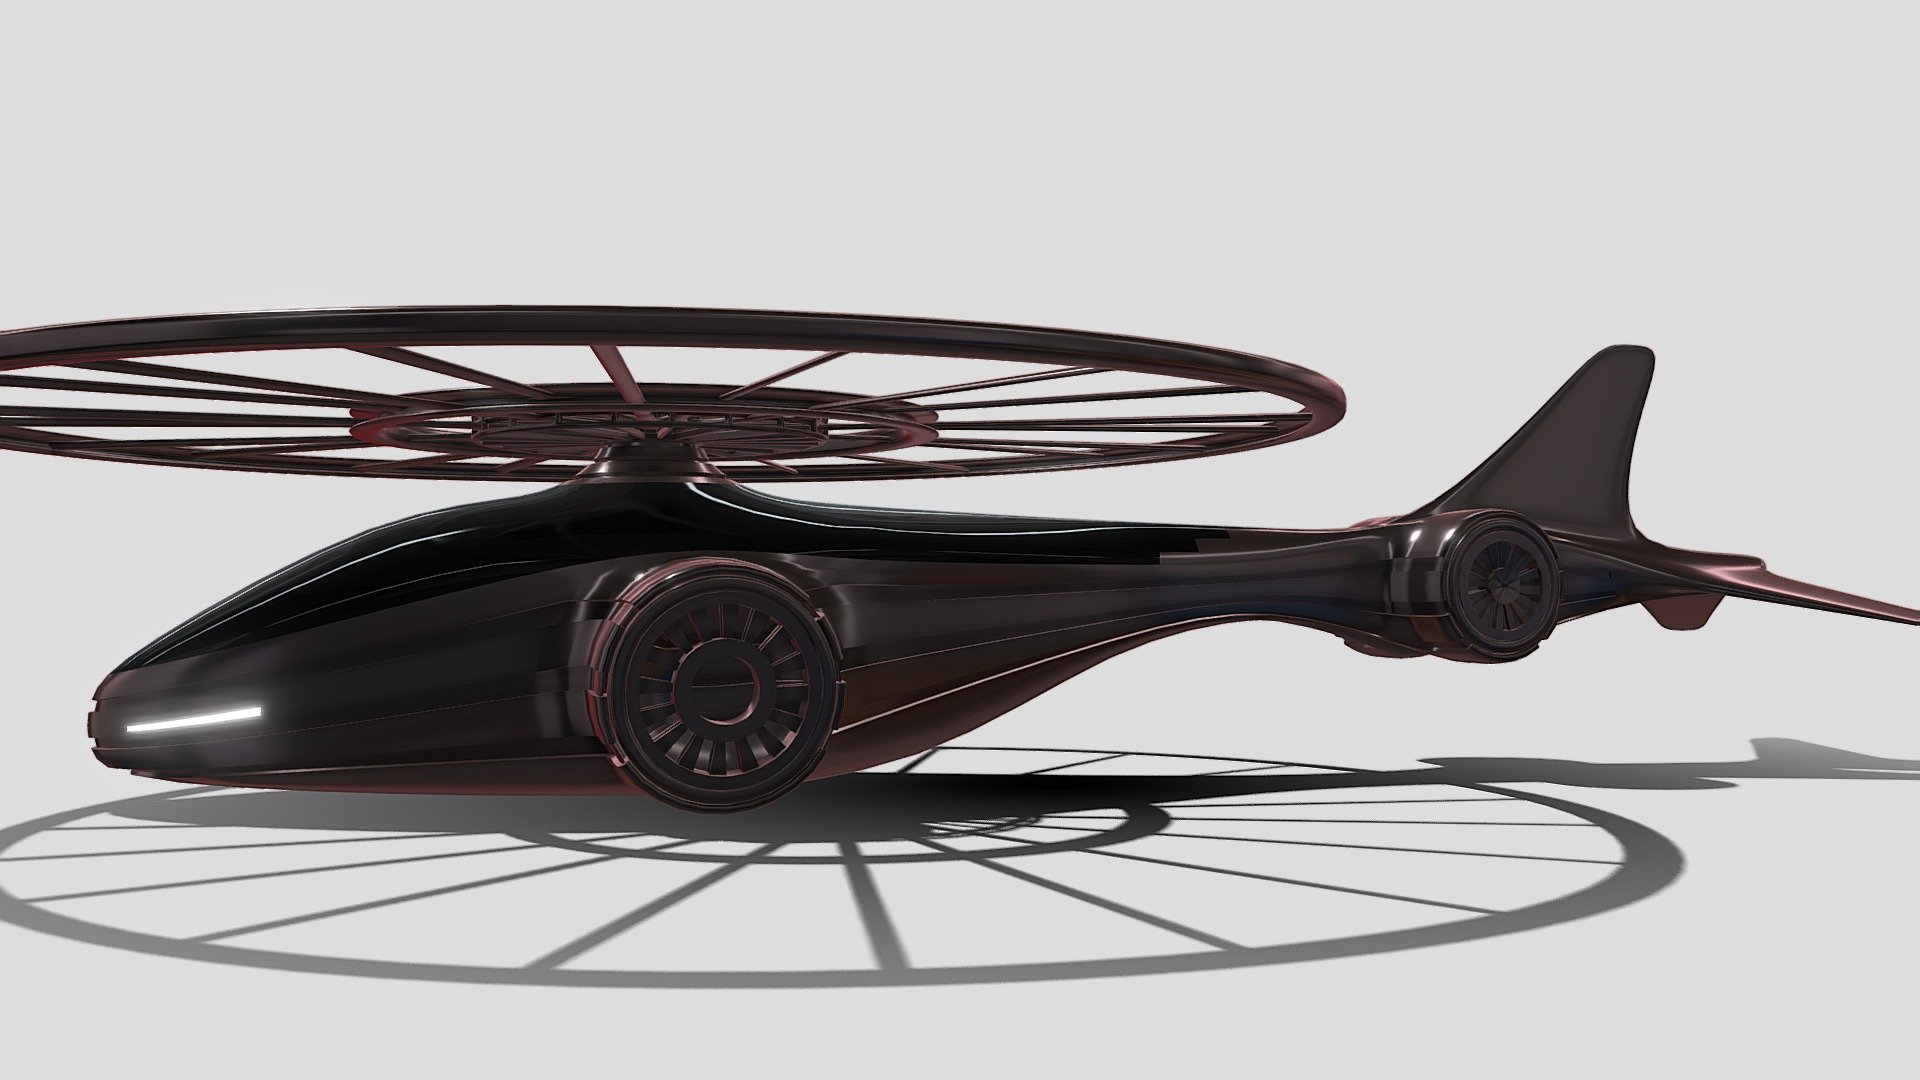 Detailed 3d model of a futuristic drone

Conceptual design by Giimann 3d model